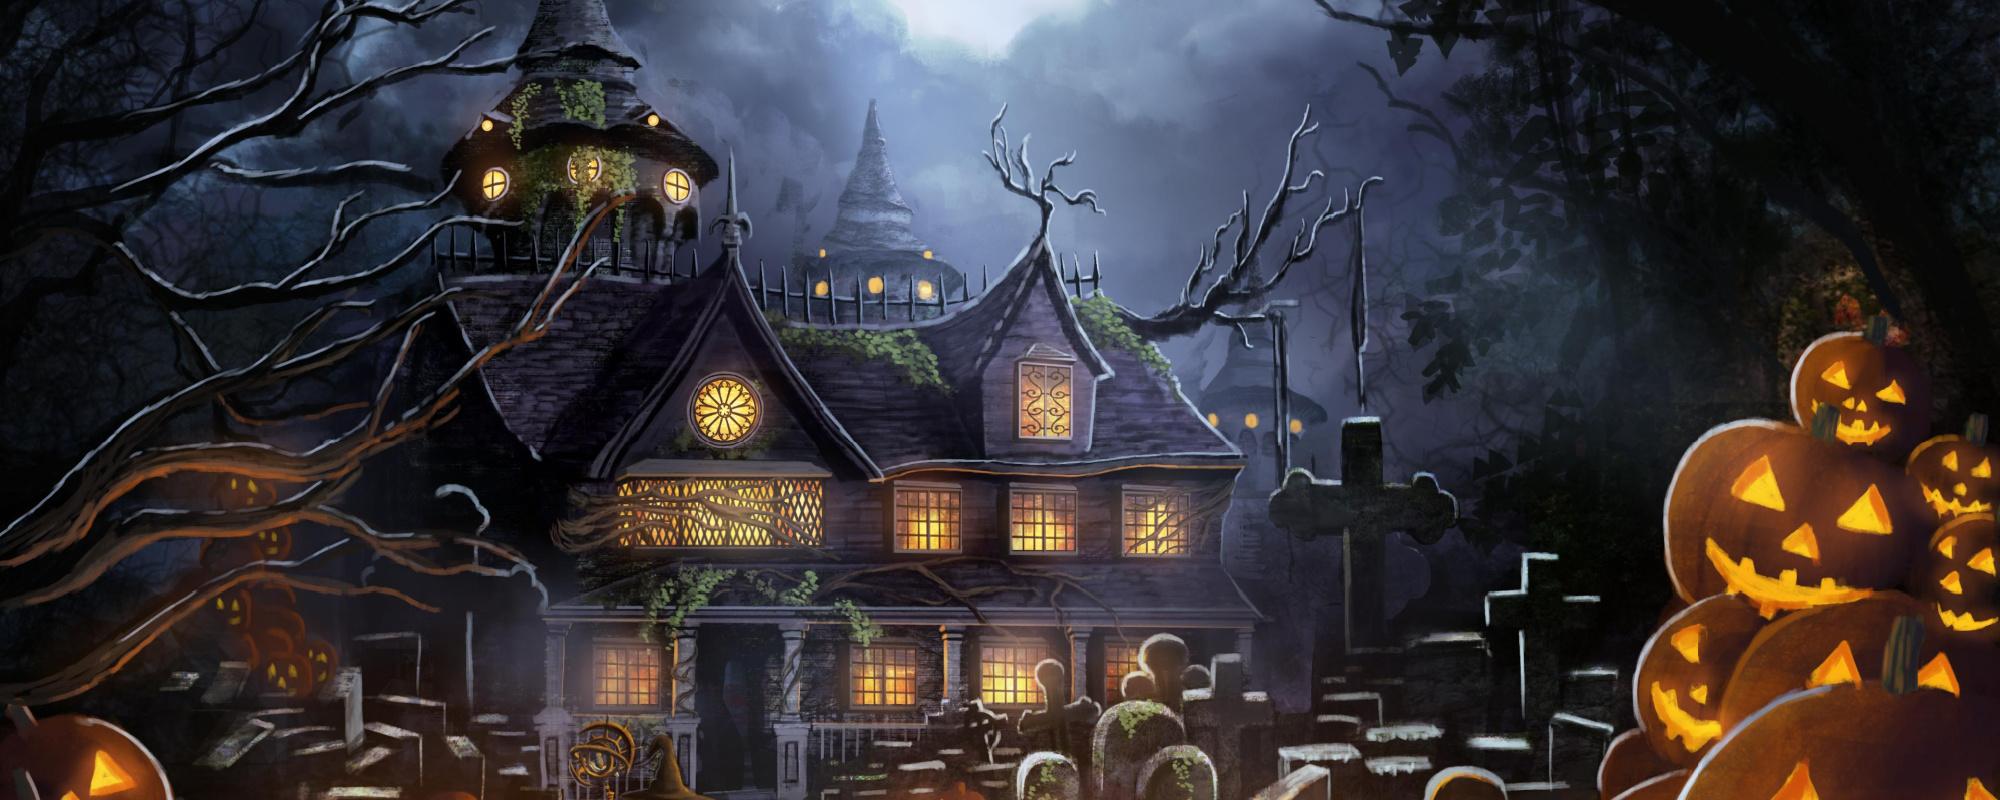 Scary Haunted House Wallpapers - Top Free Scary Haunted House Backgrounds -  WallpaperAccess